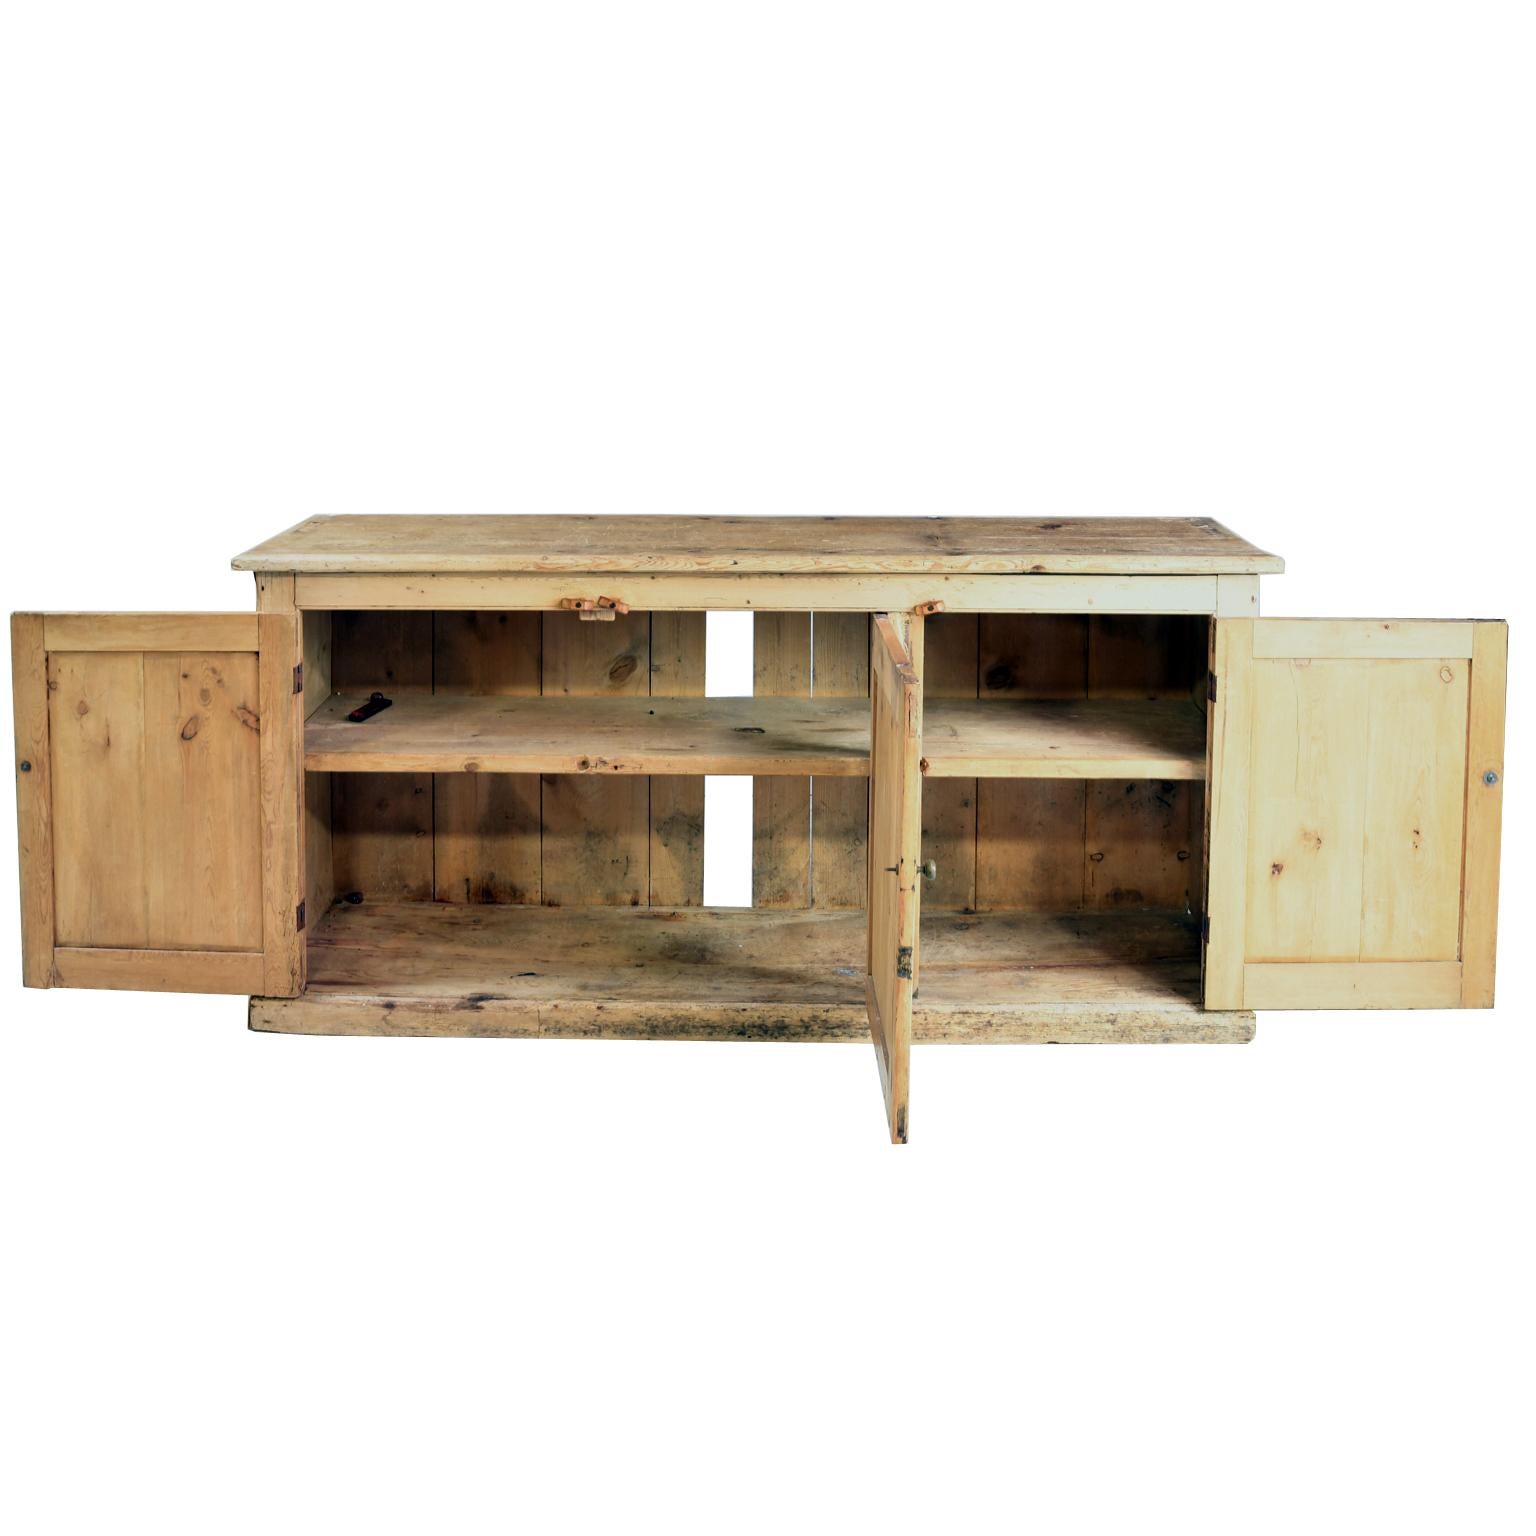 Country Light Pine Rustic Counter Console with 3 Doors and Interior Shelving, circa 1840